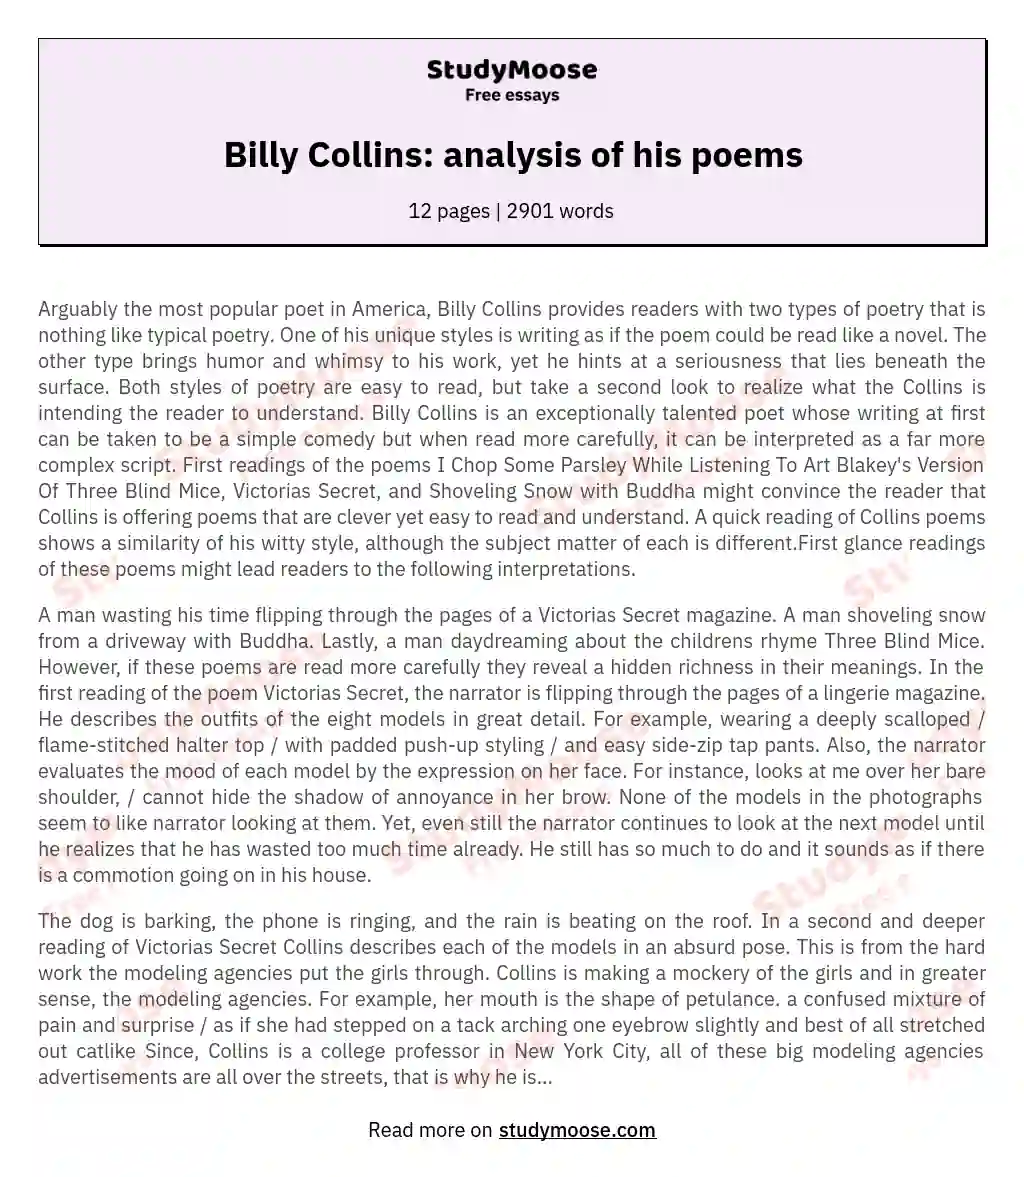 Billy Collins: analysis of his poems